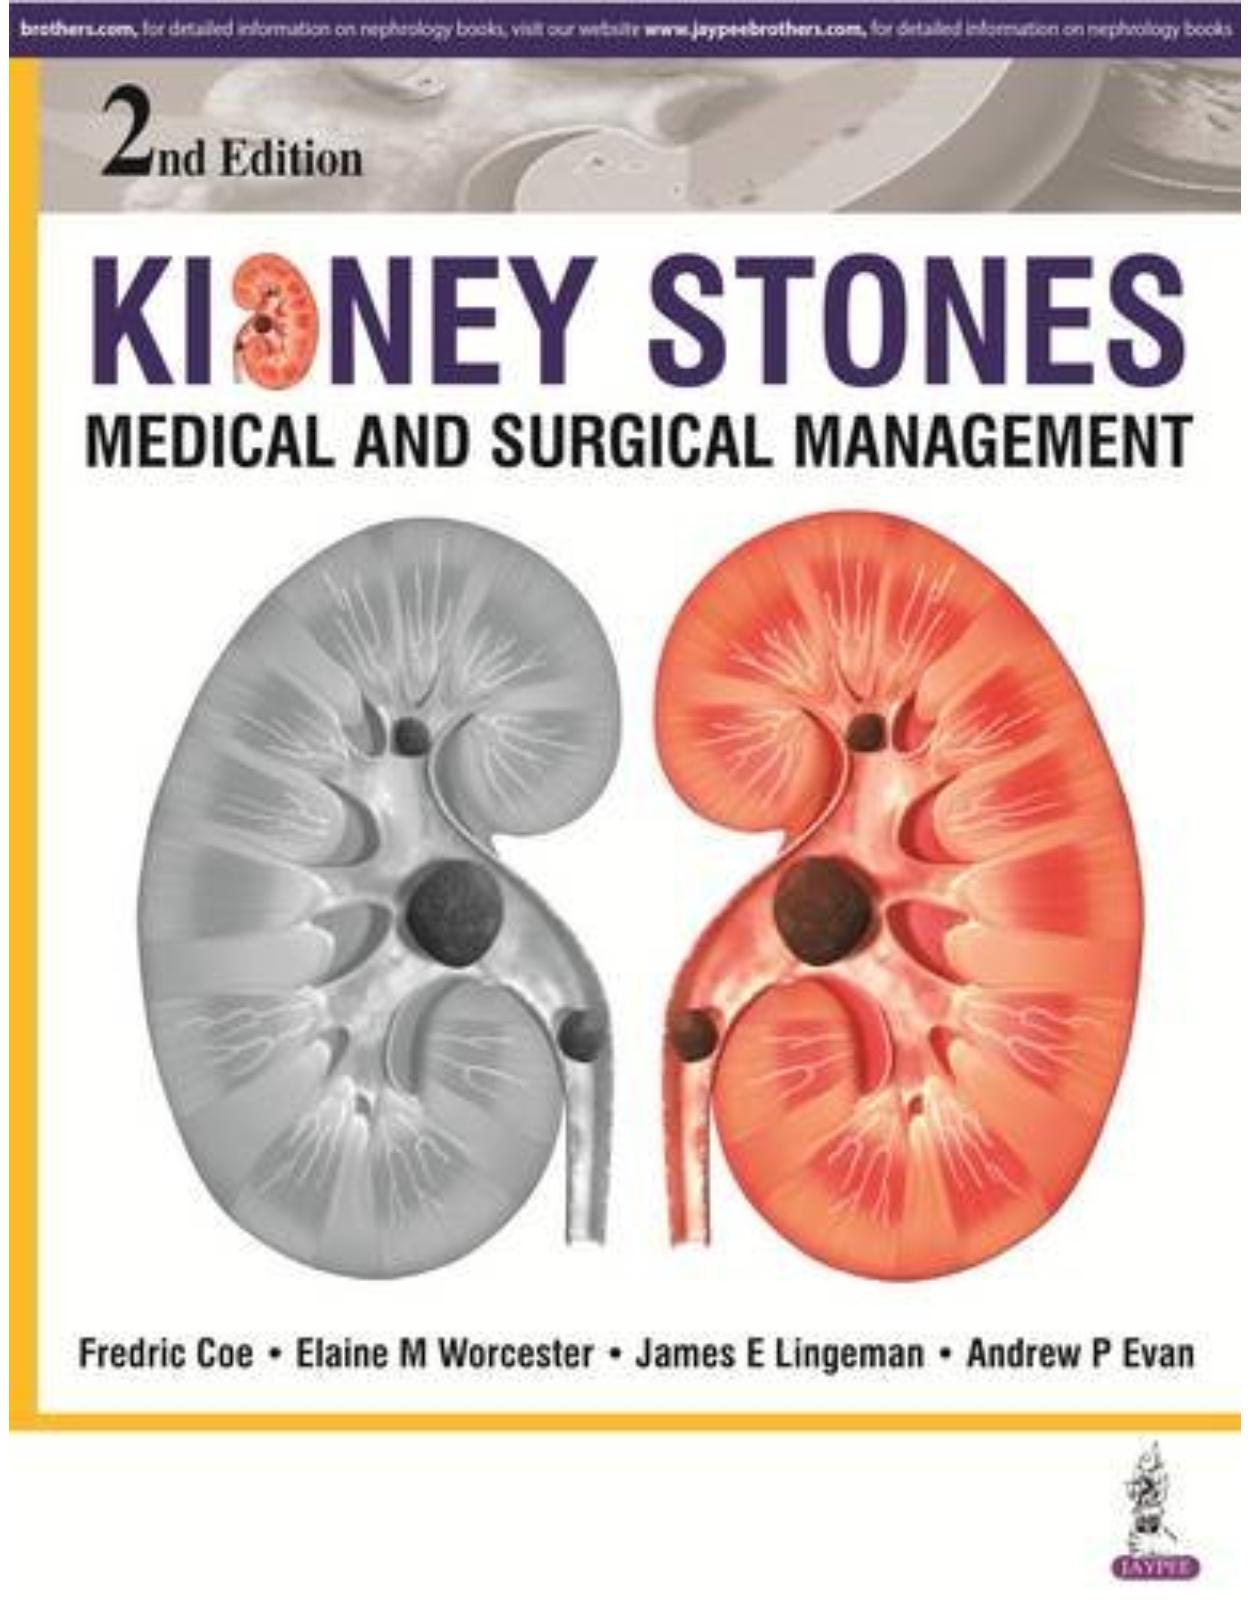 Kidney Stones: Medical and Surgical Management